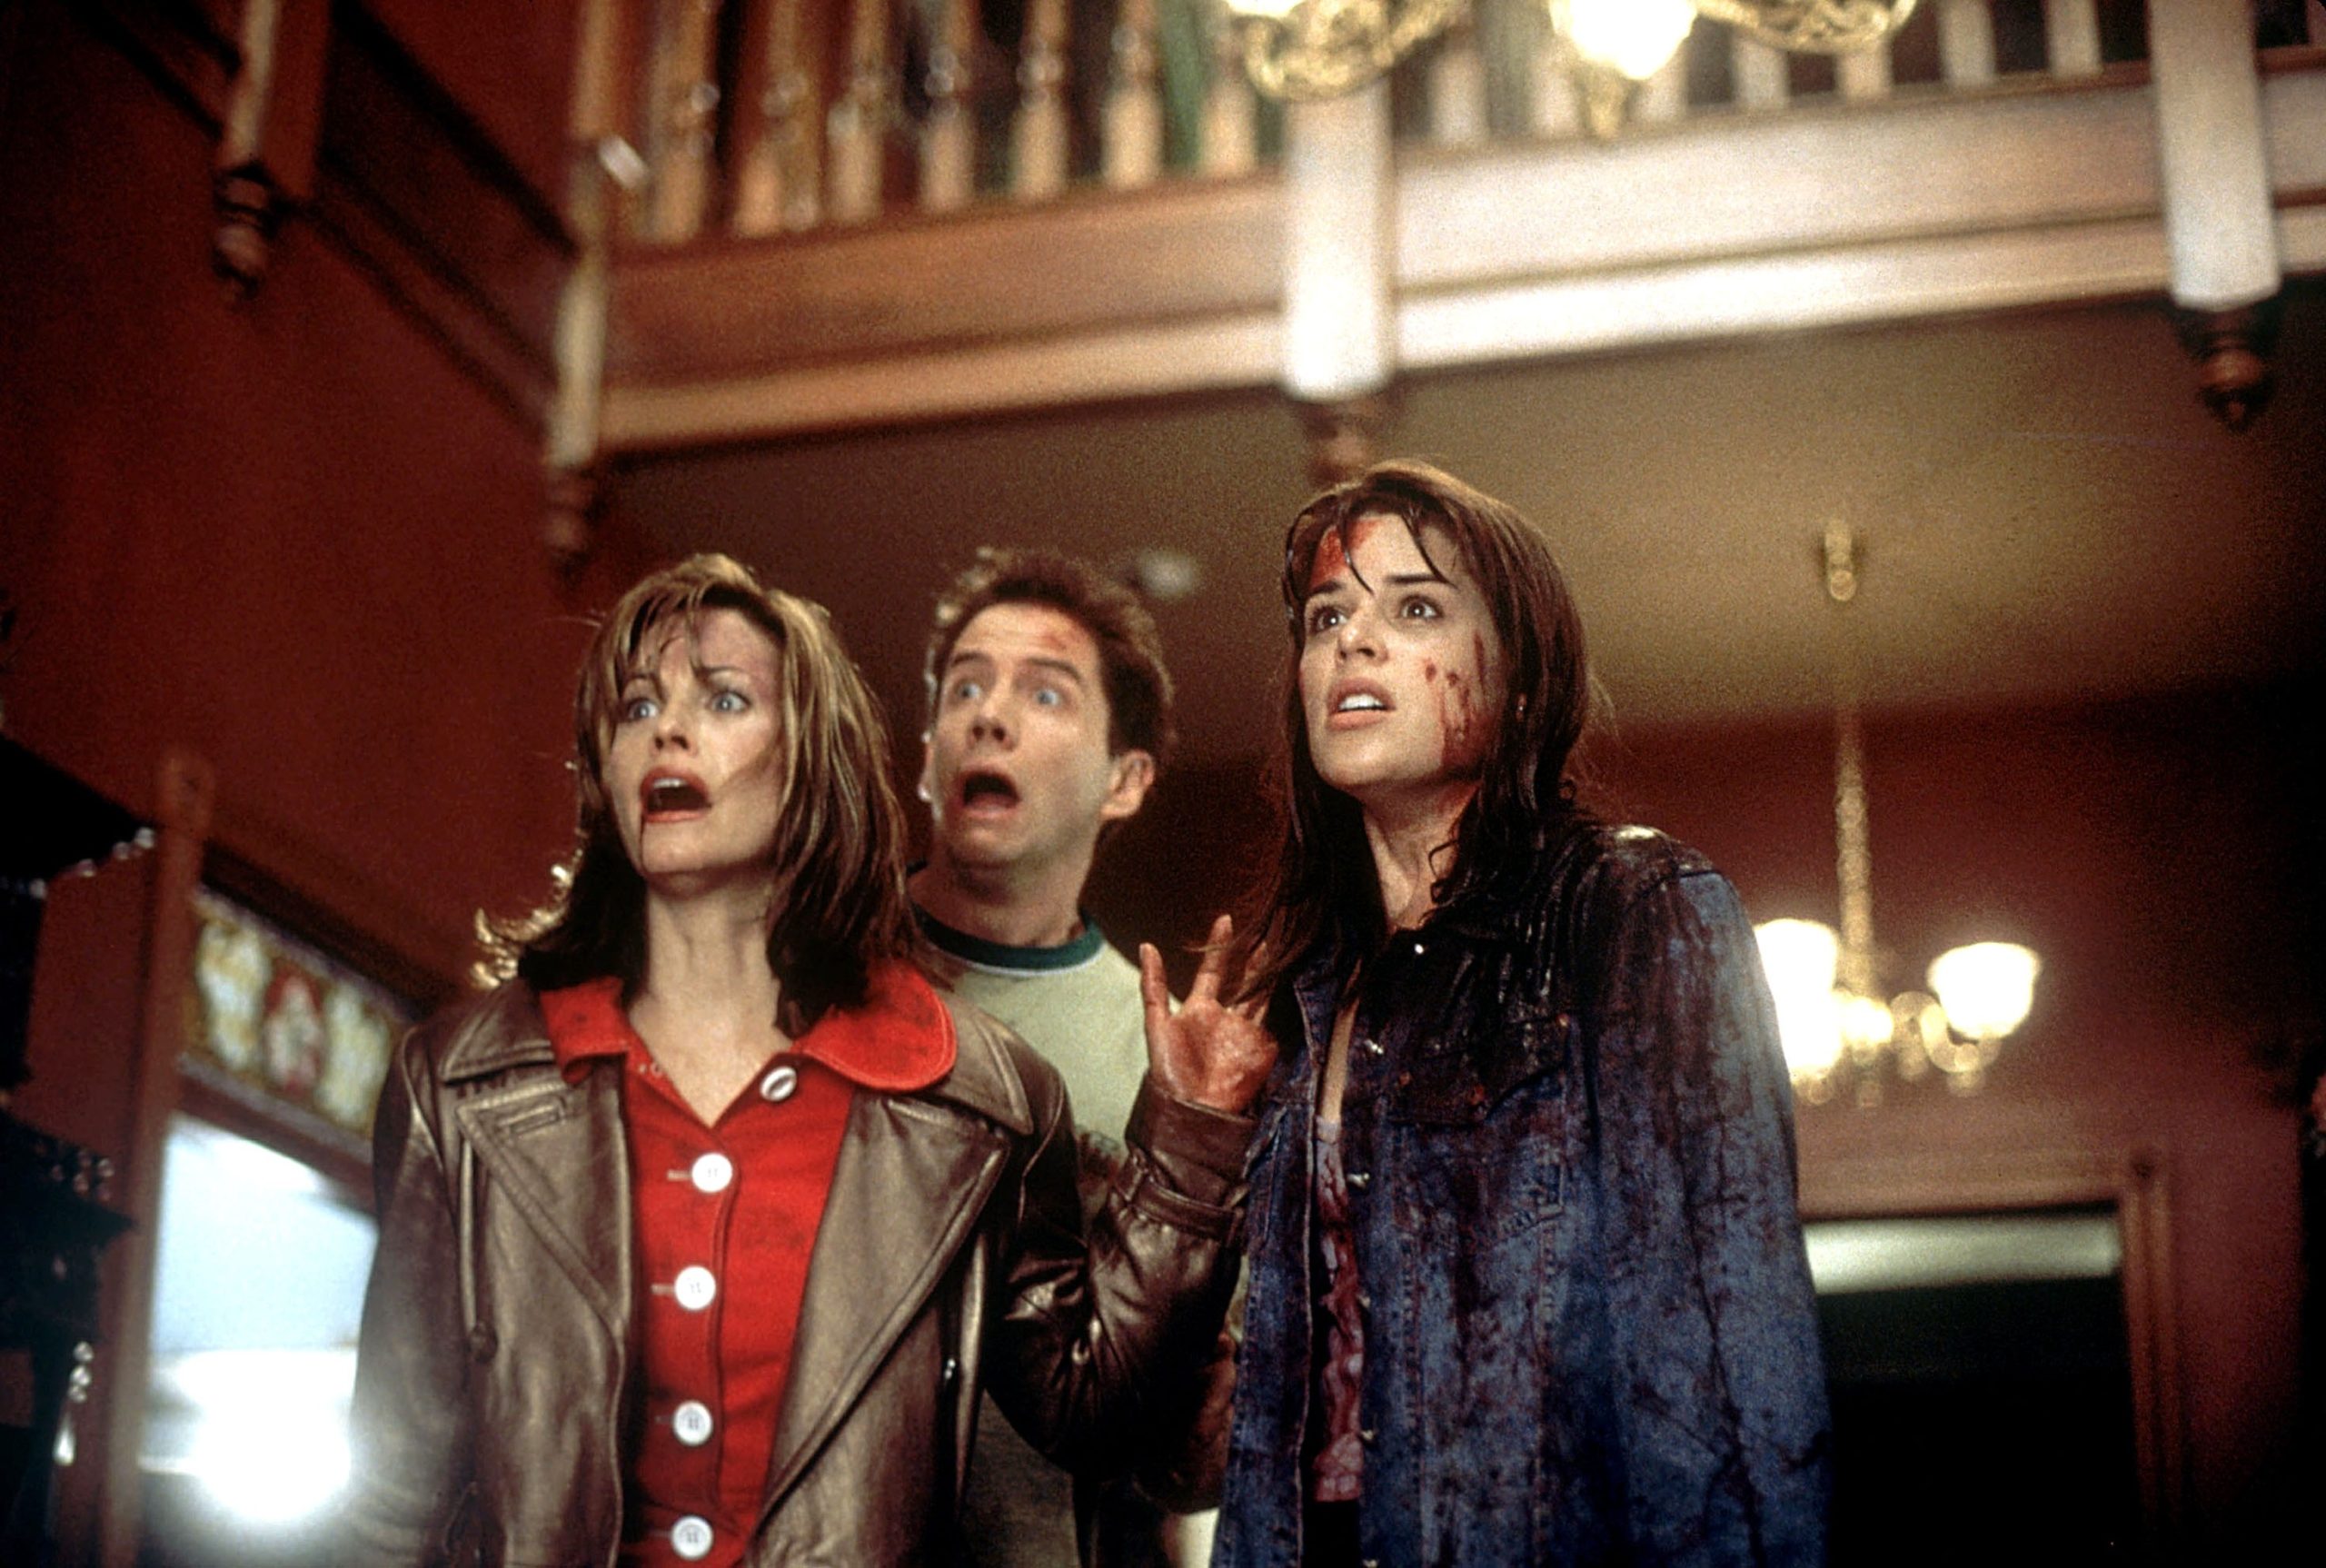 SCREAM, Courteney Cox, Jamie Kennedy, Neve Campbell, 1996, (c) Dimension/courtesy Everett Collection